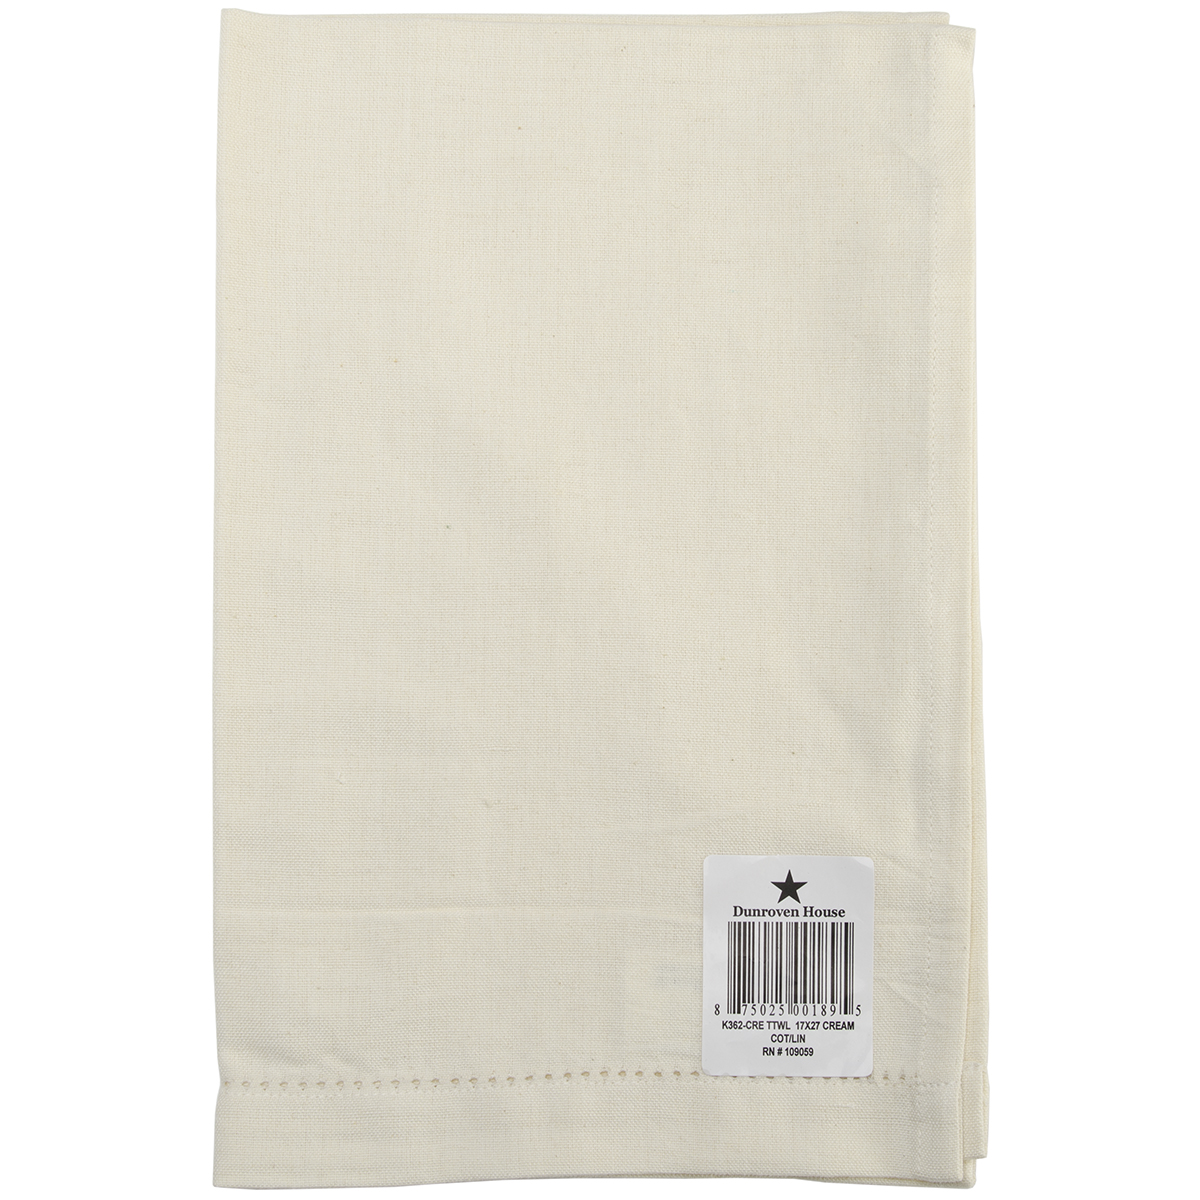 Dunroven House Cotton/Linen Blend Hand Towel 17"X27"-Cream - image 1 of 2